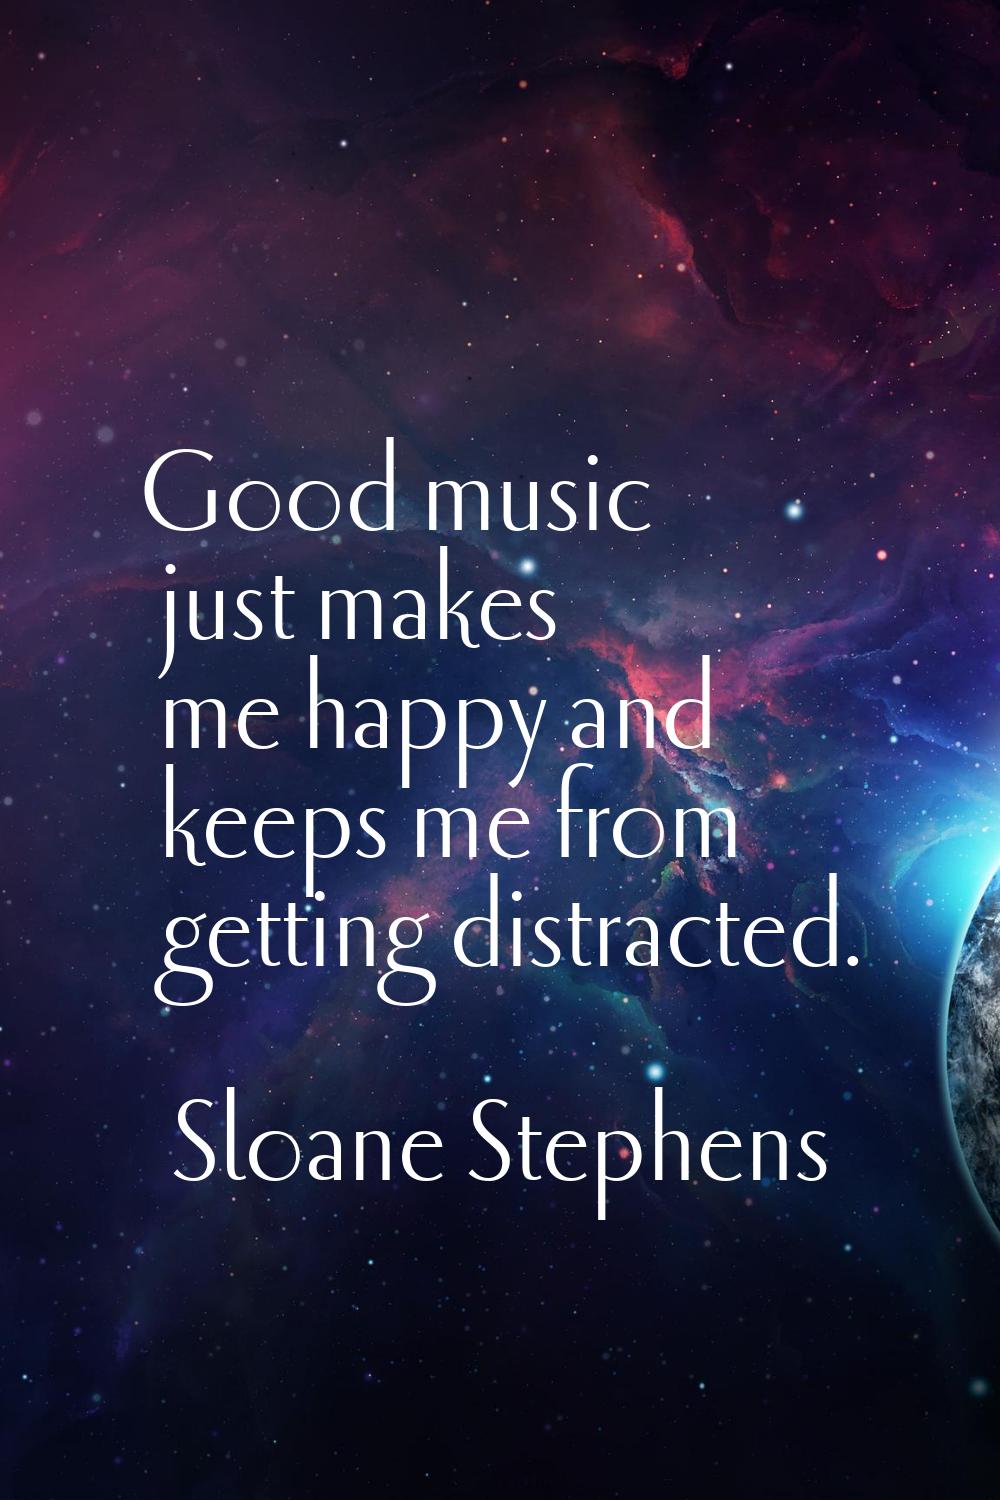 Good music just makes me happy and keeps me from getting distracted.